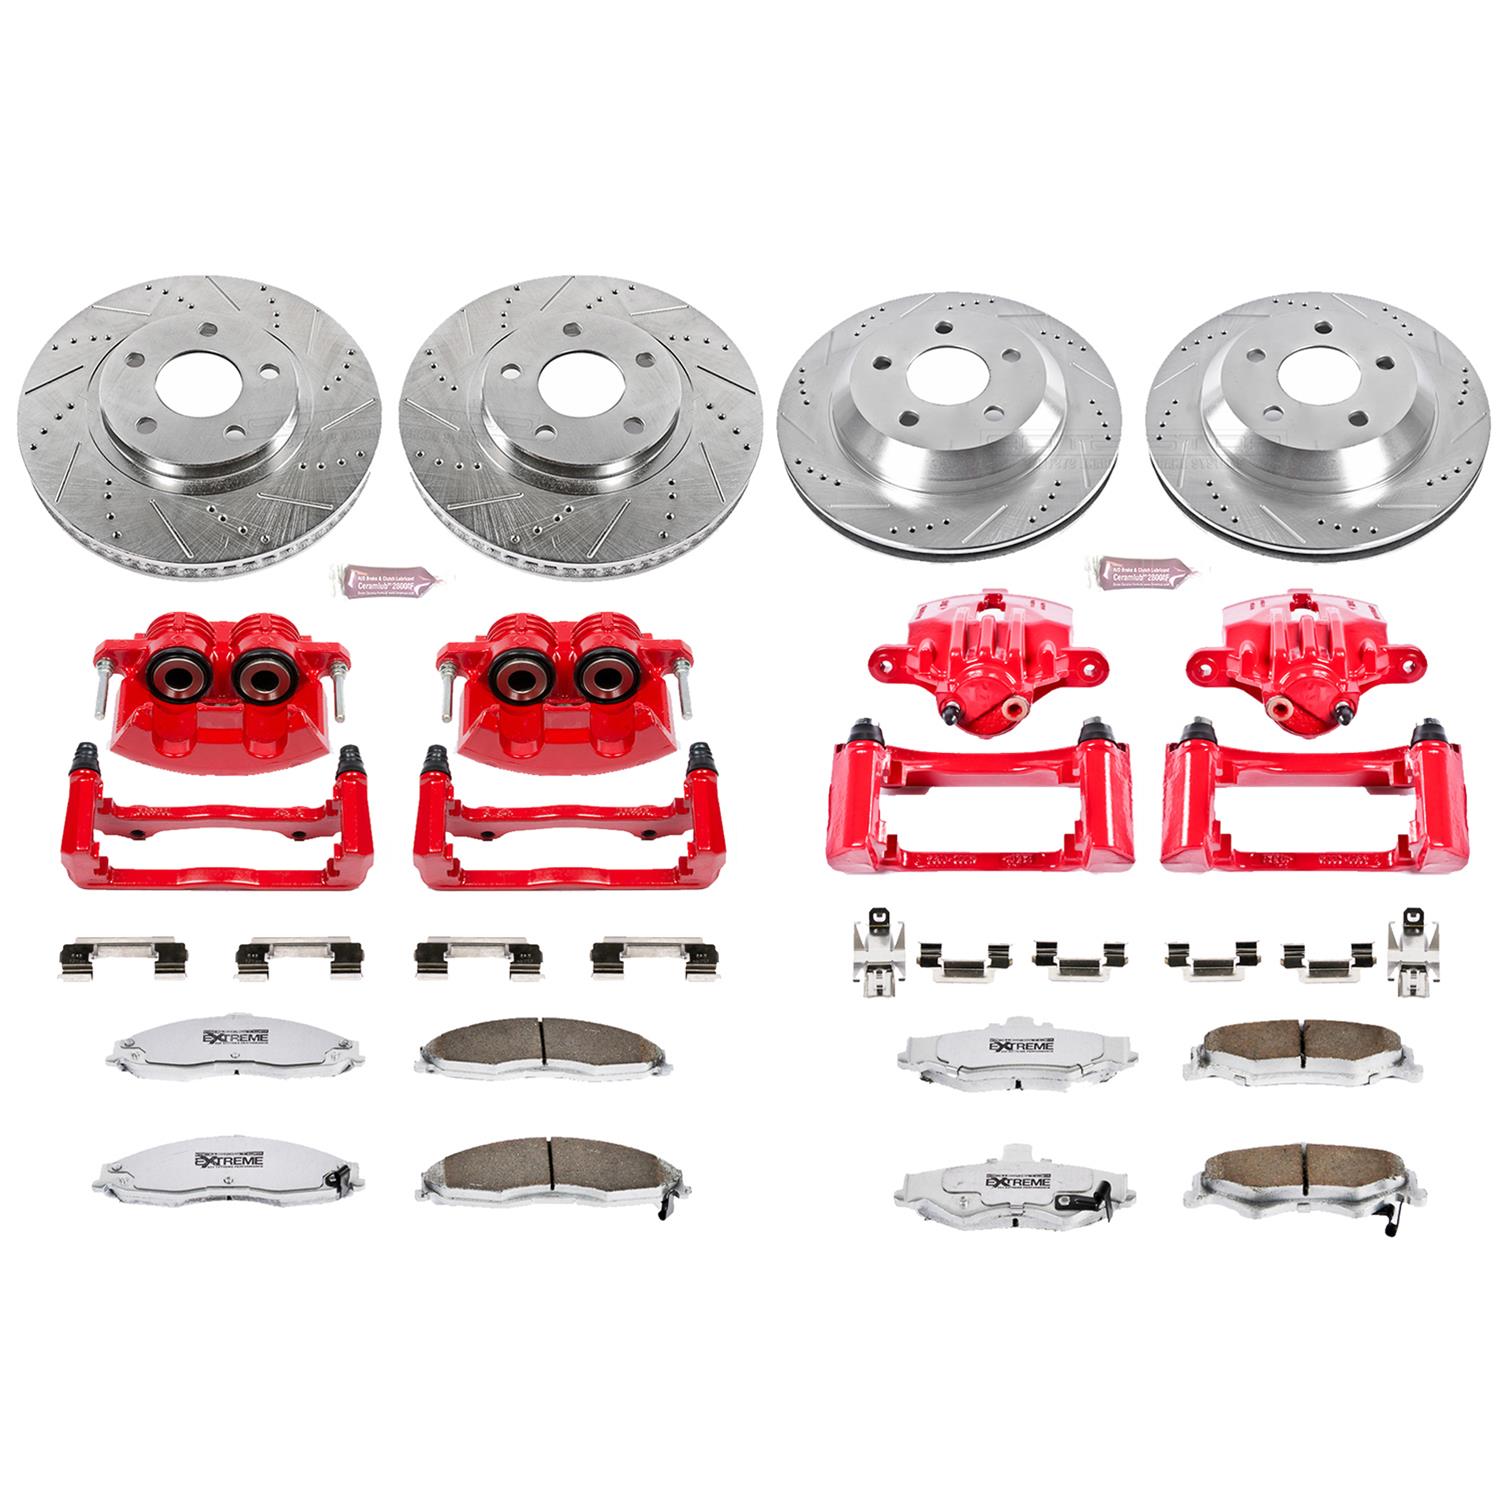 Z26-1549 Powerstop 2-Wheel Set Brake Pad Sets Front New for Audi A6 Quattro A8